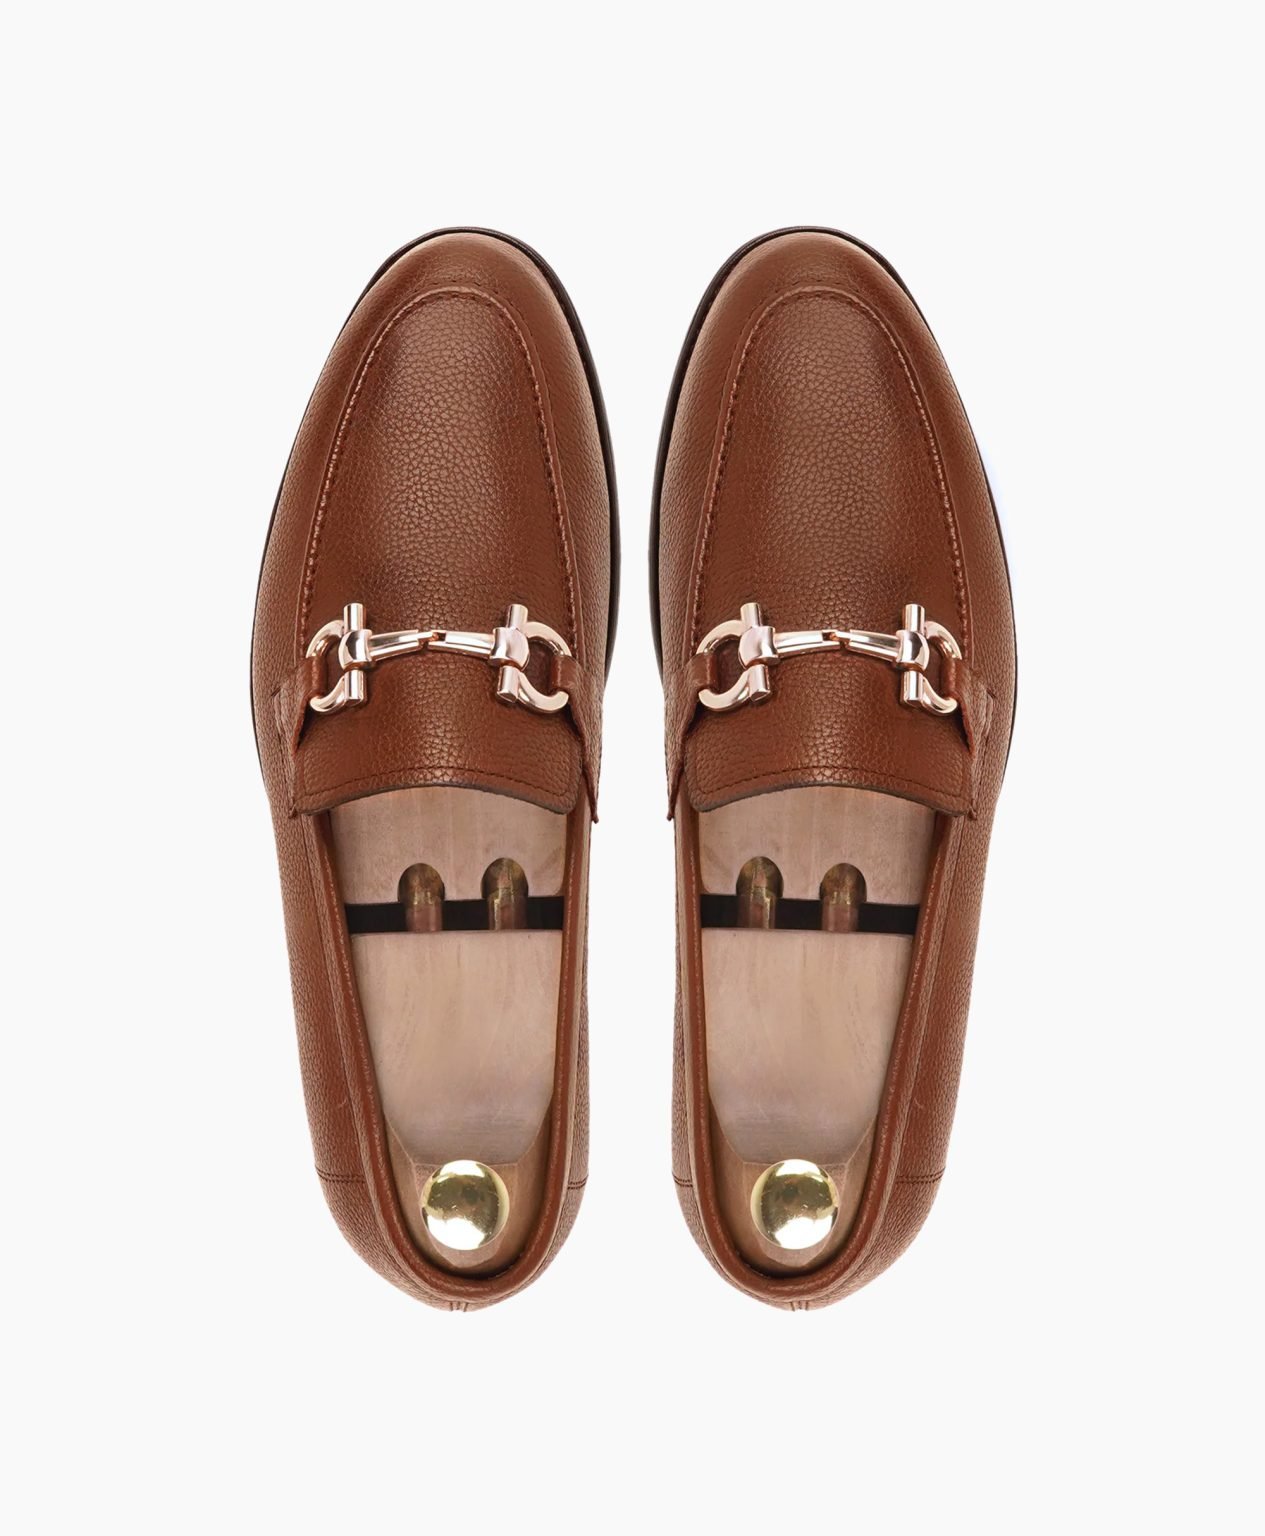 axminster-tan-leather-loafers-image202